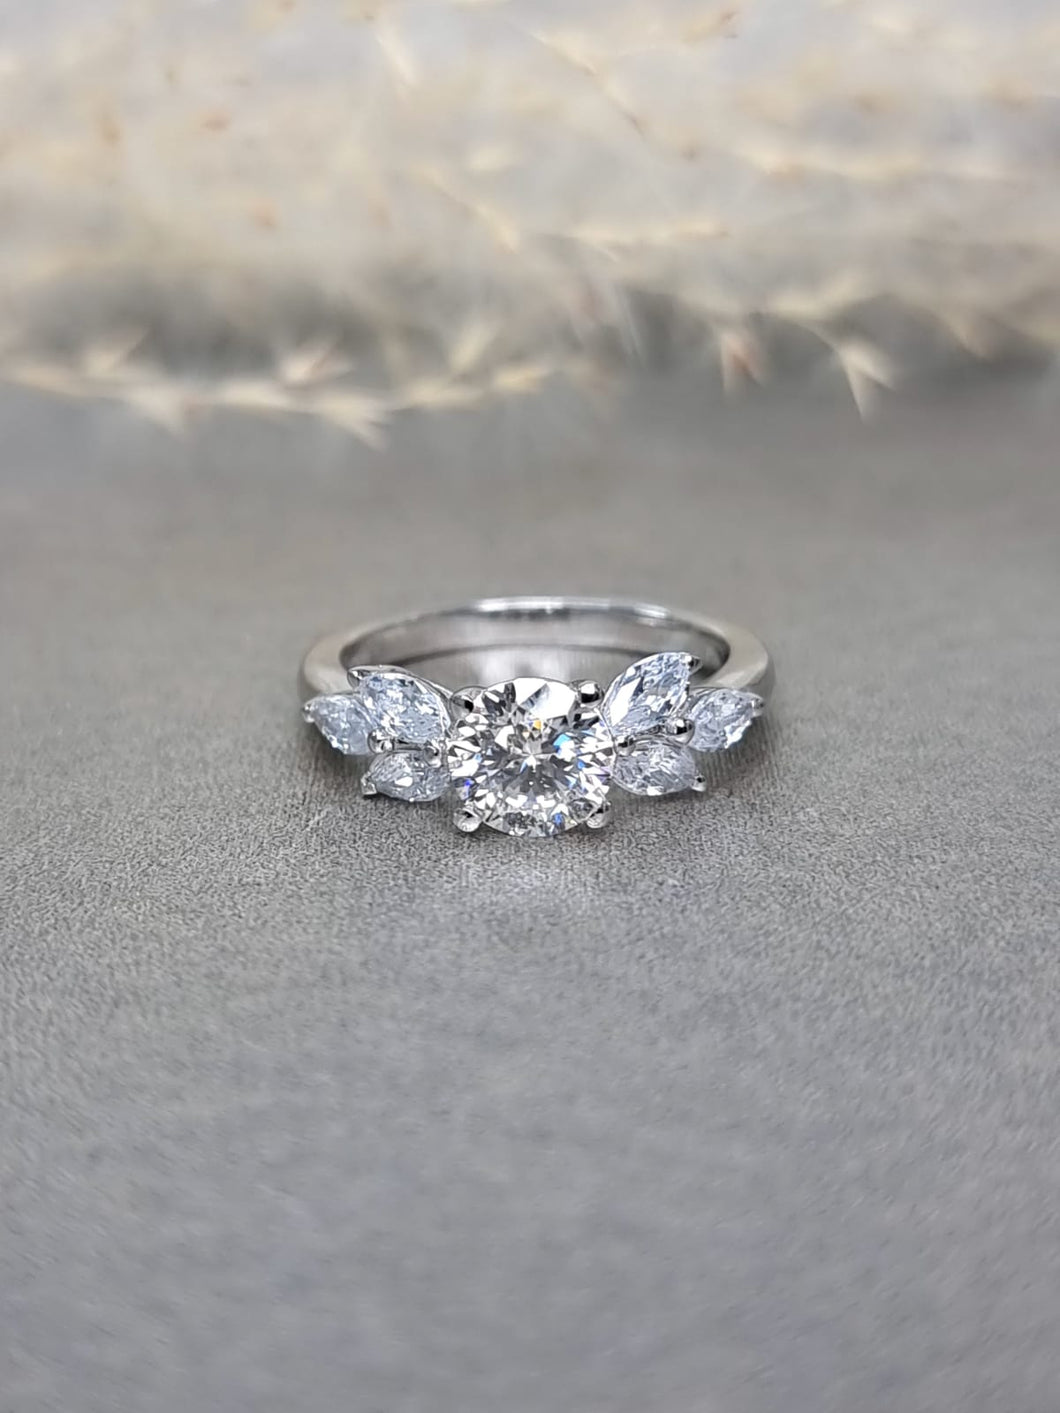 1.00ct Round Brilliant Cut Moissanite Diamond With Side Marquise Cut Stone Ring